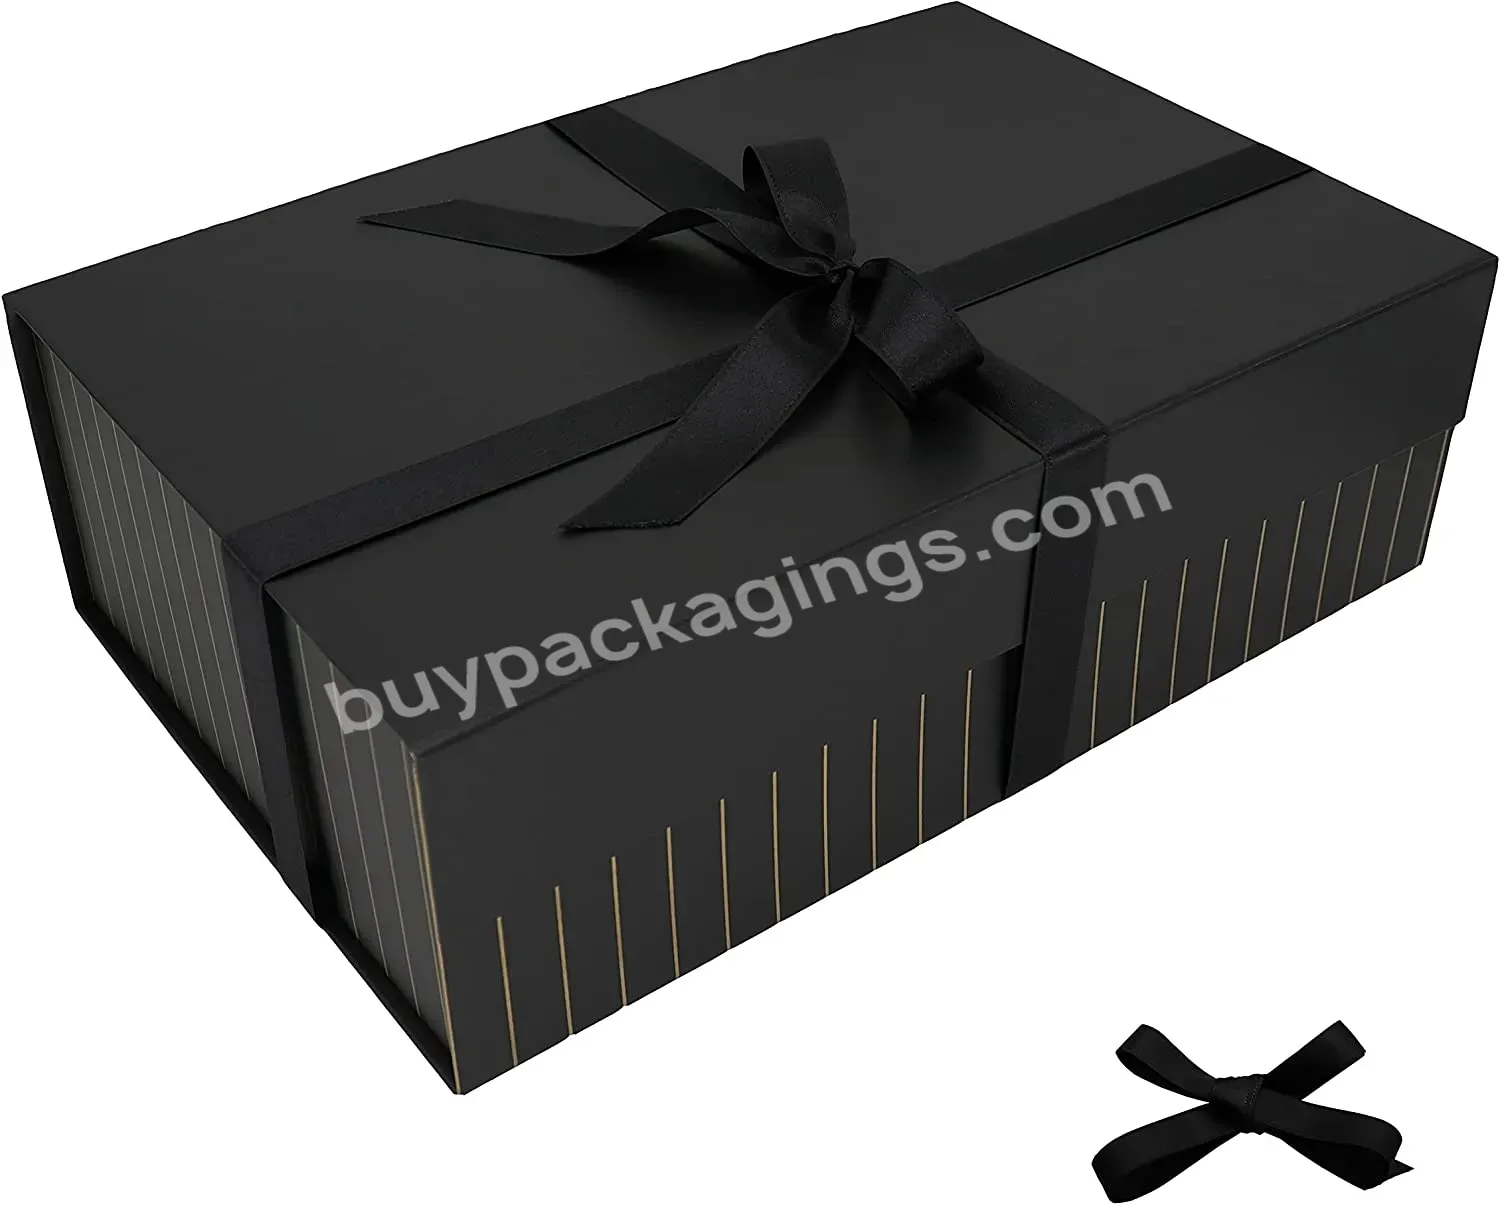 Folding Ribbon Packaging Paper Box Eco Friendly Custom Clothing Luxury Mailer Box With Logo - Buy Underwear Box,Men Boxes Underwear,Boxes For Gift Sets.